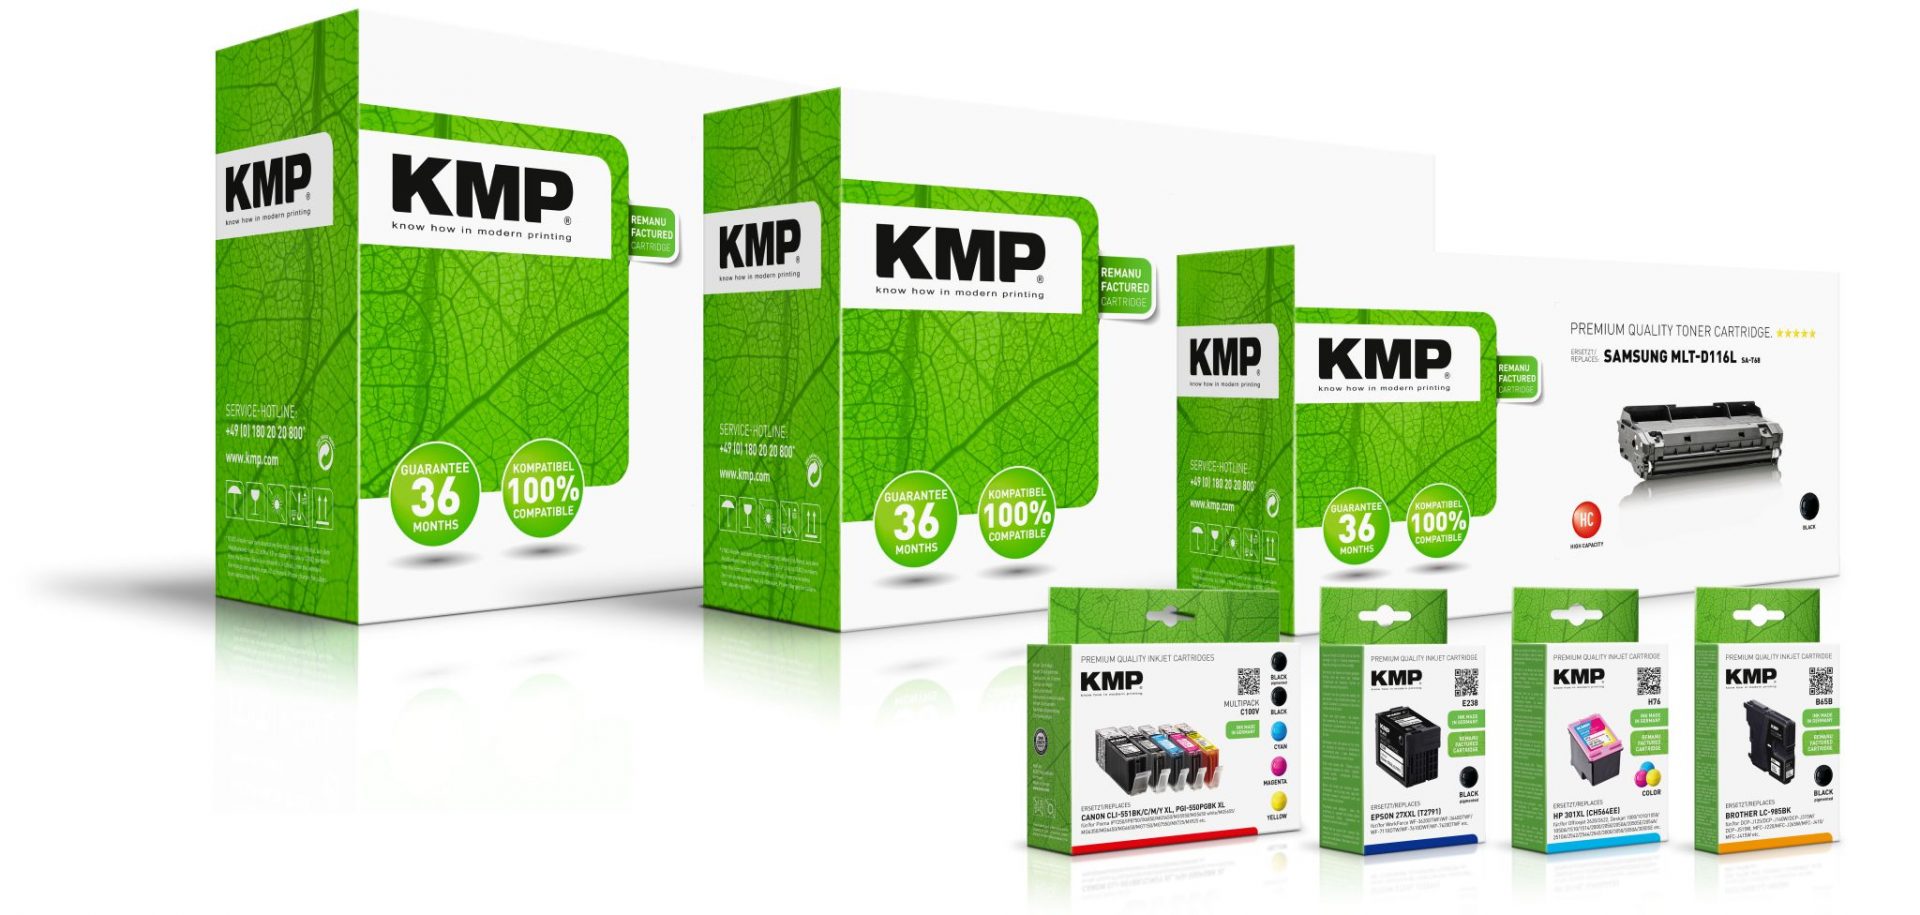 KMP signs up for ETIRA's Certification Label - The Recycler - 13/10/2022